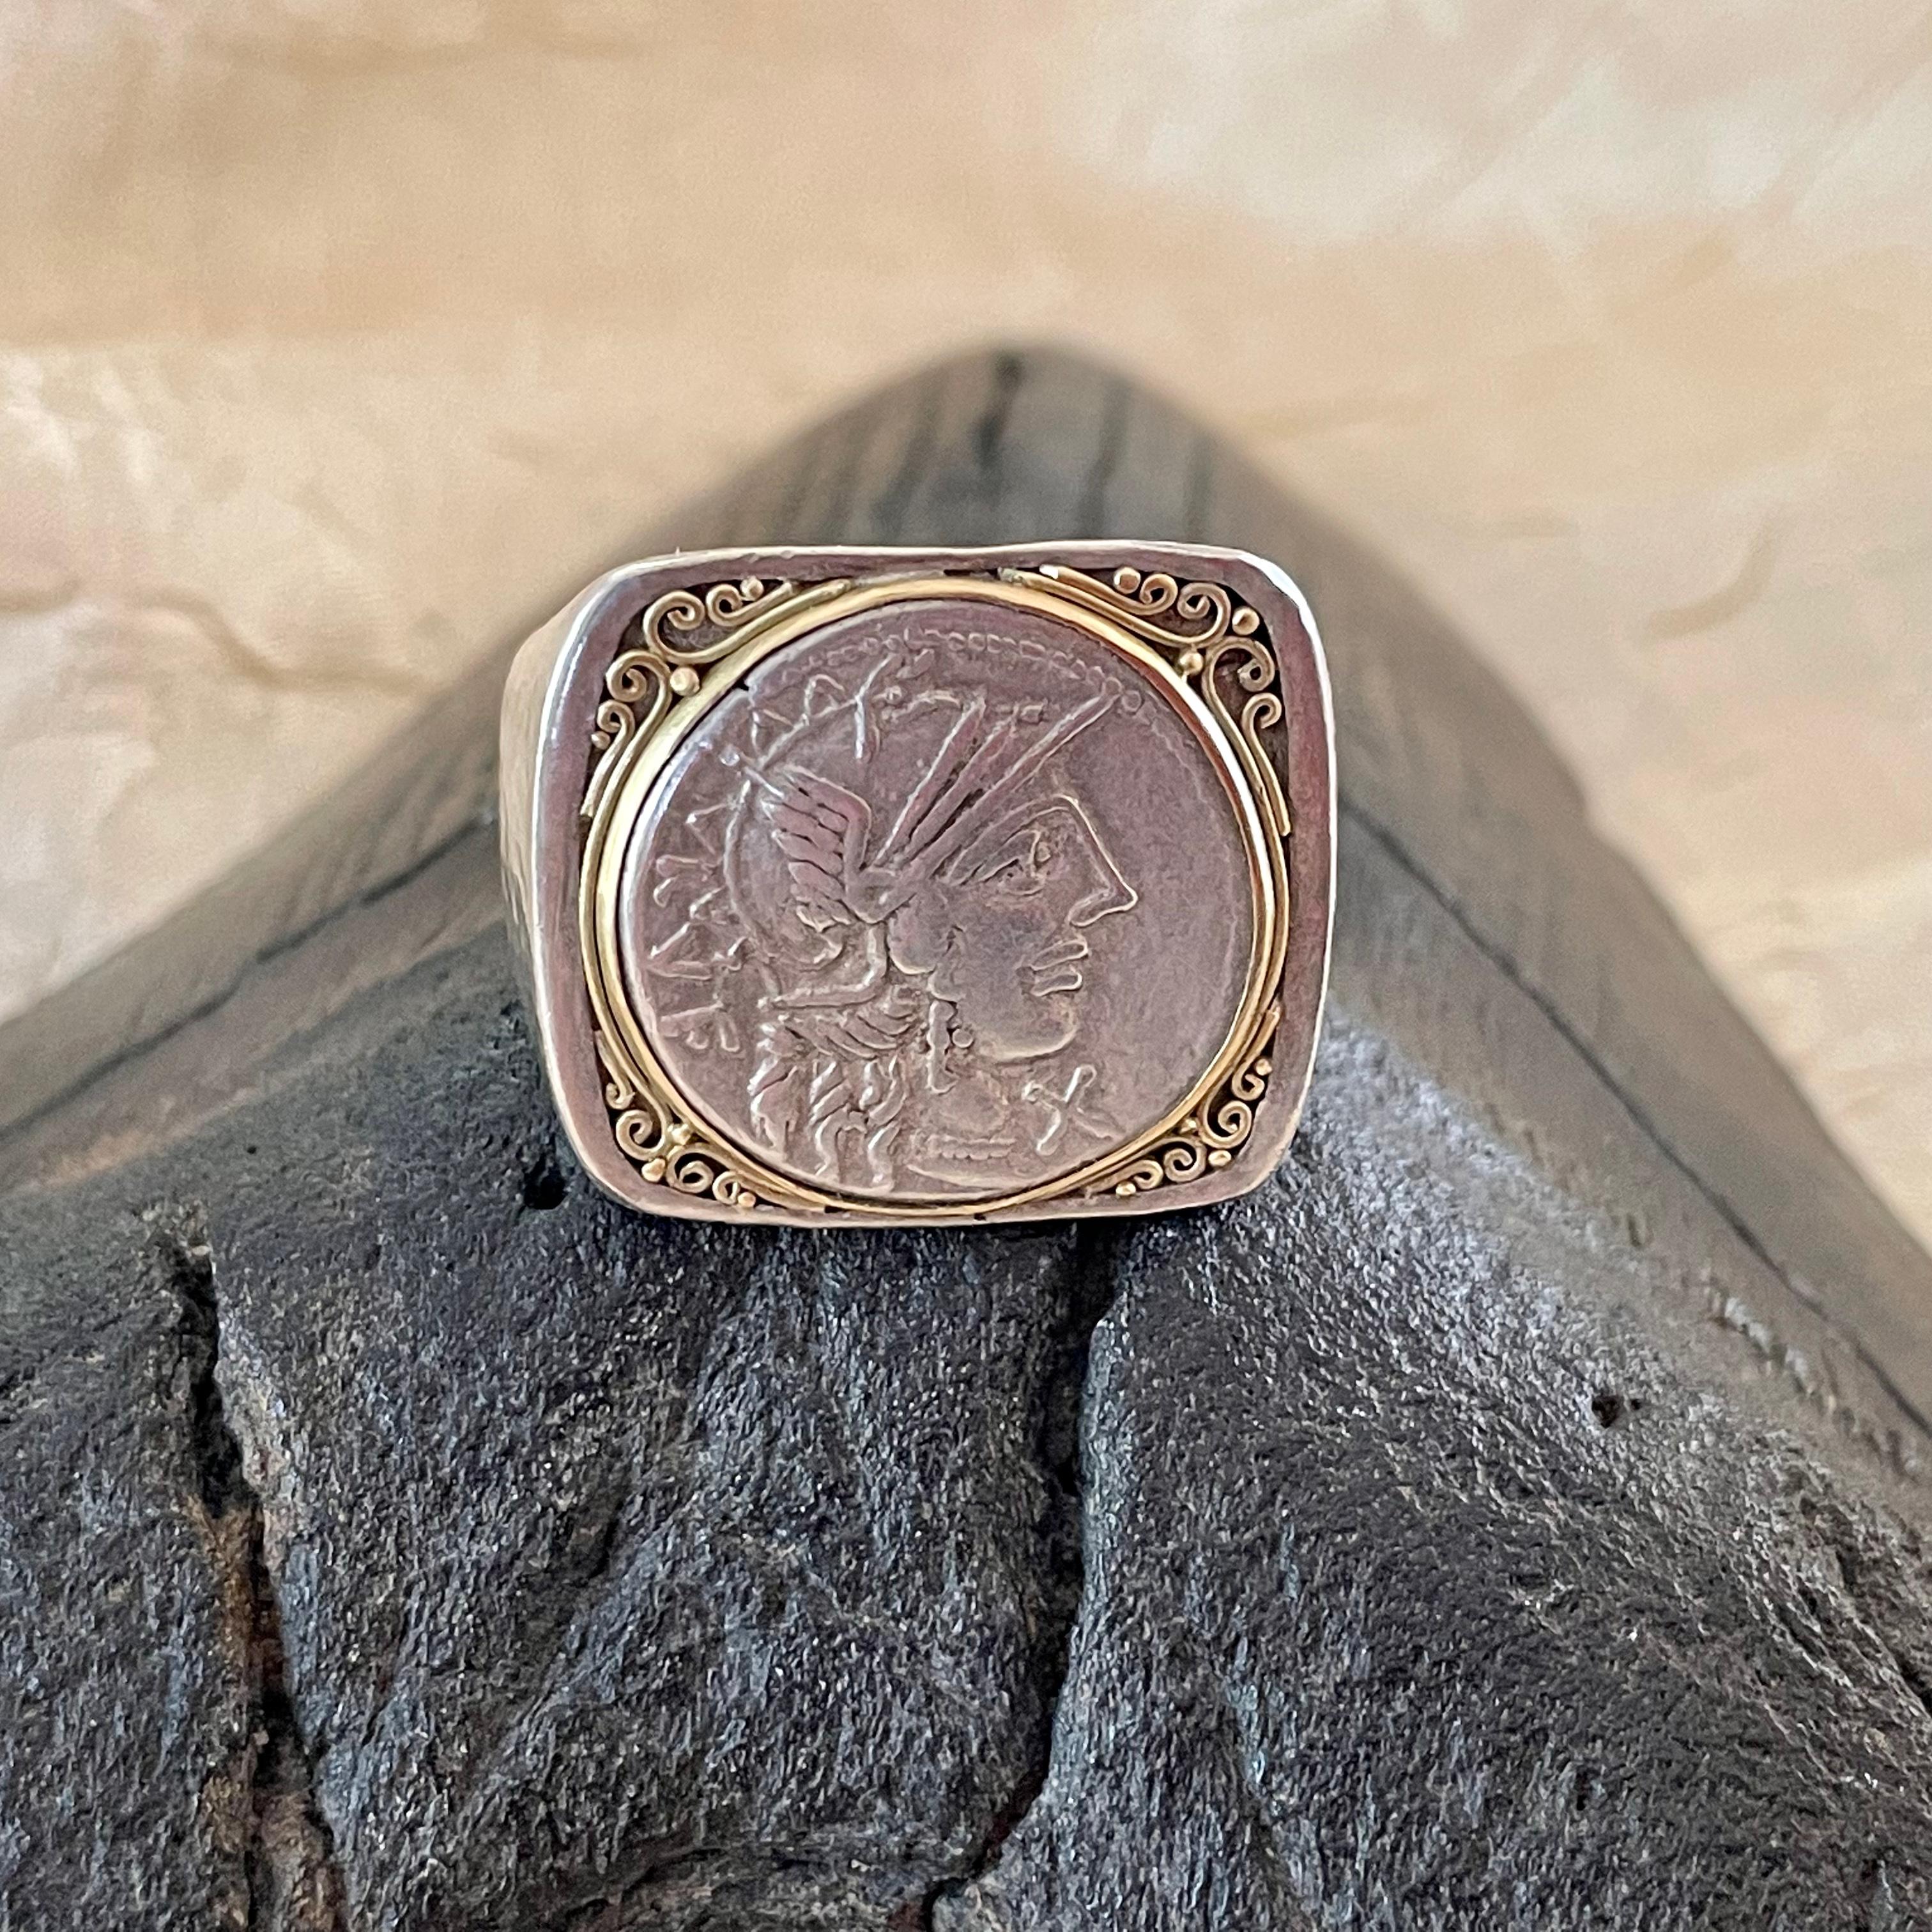 An authentic denarius coin from the Roman Republic of 122 BC is set in signature 18K bezel surrounded by hand applied fine wire work in a wide rectangular mount atop a wide hammered matte-finish sterling silver shank in this Steven Battelle classic